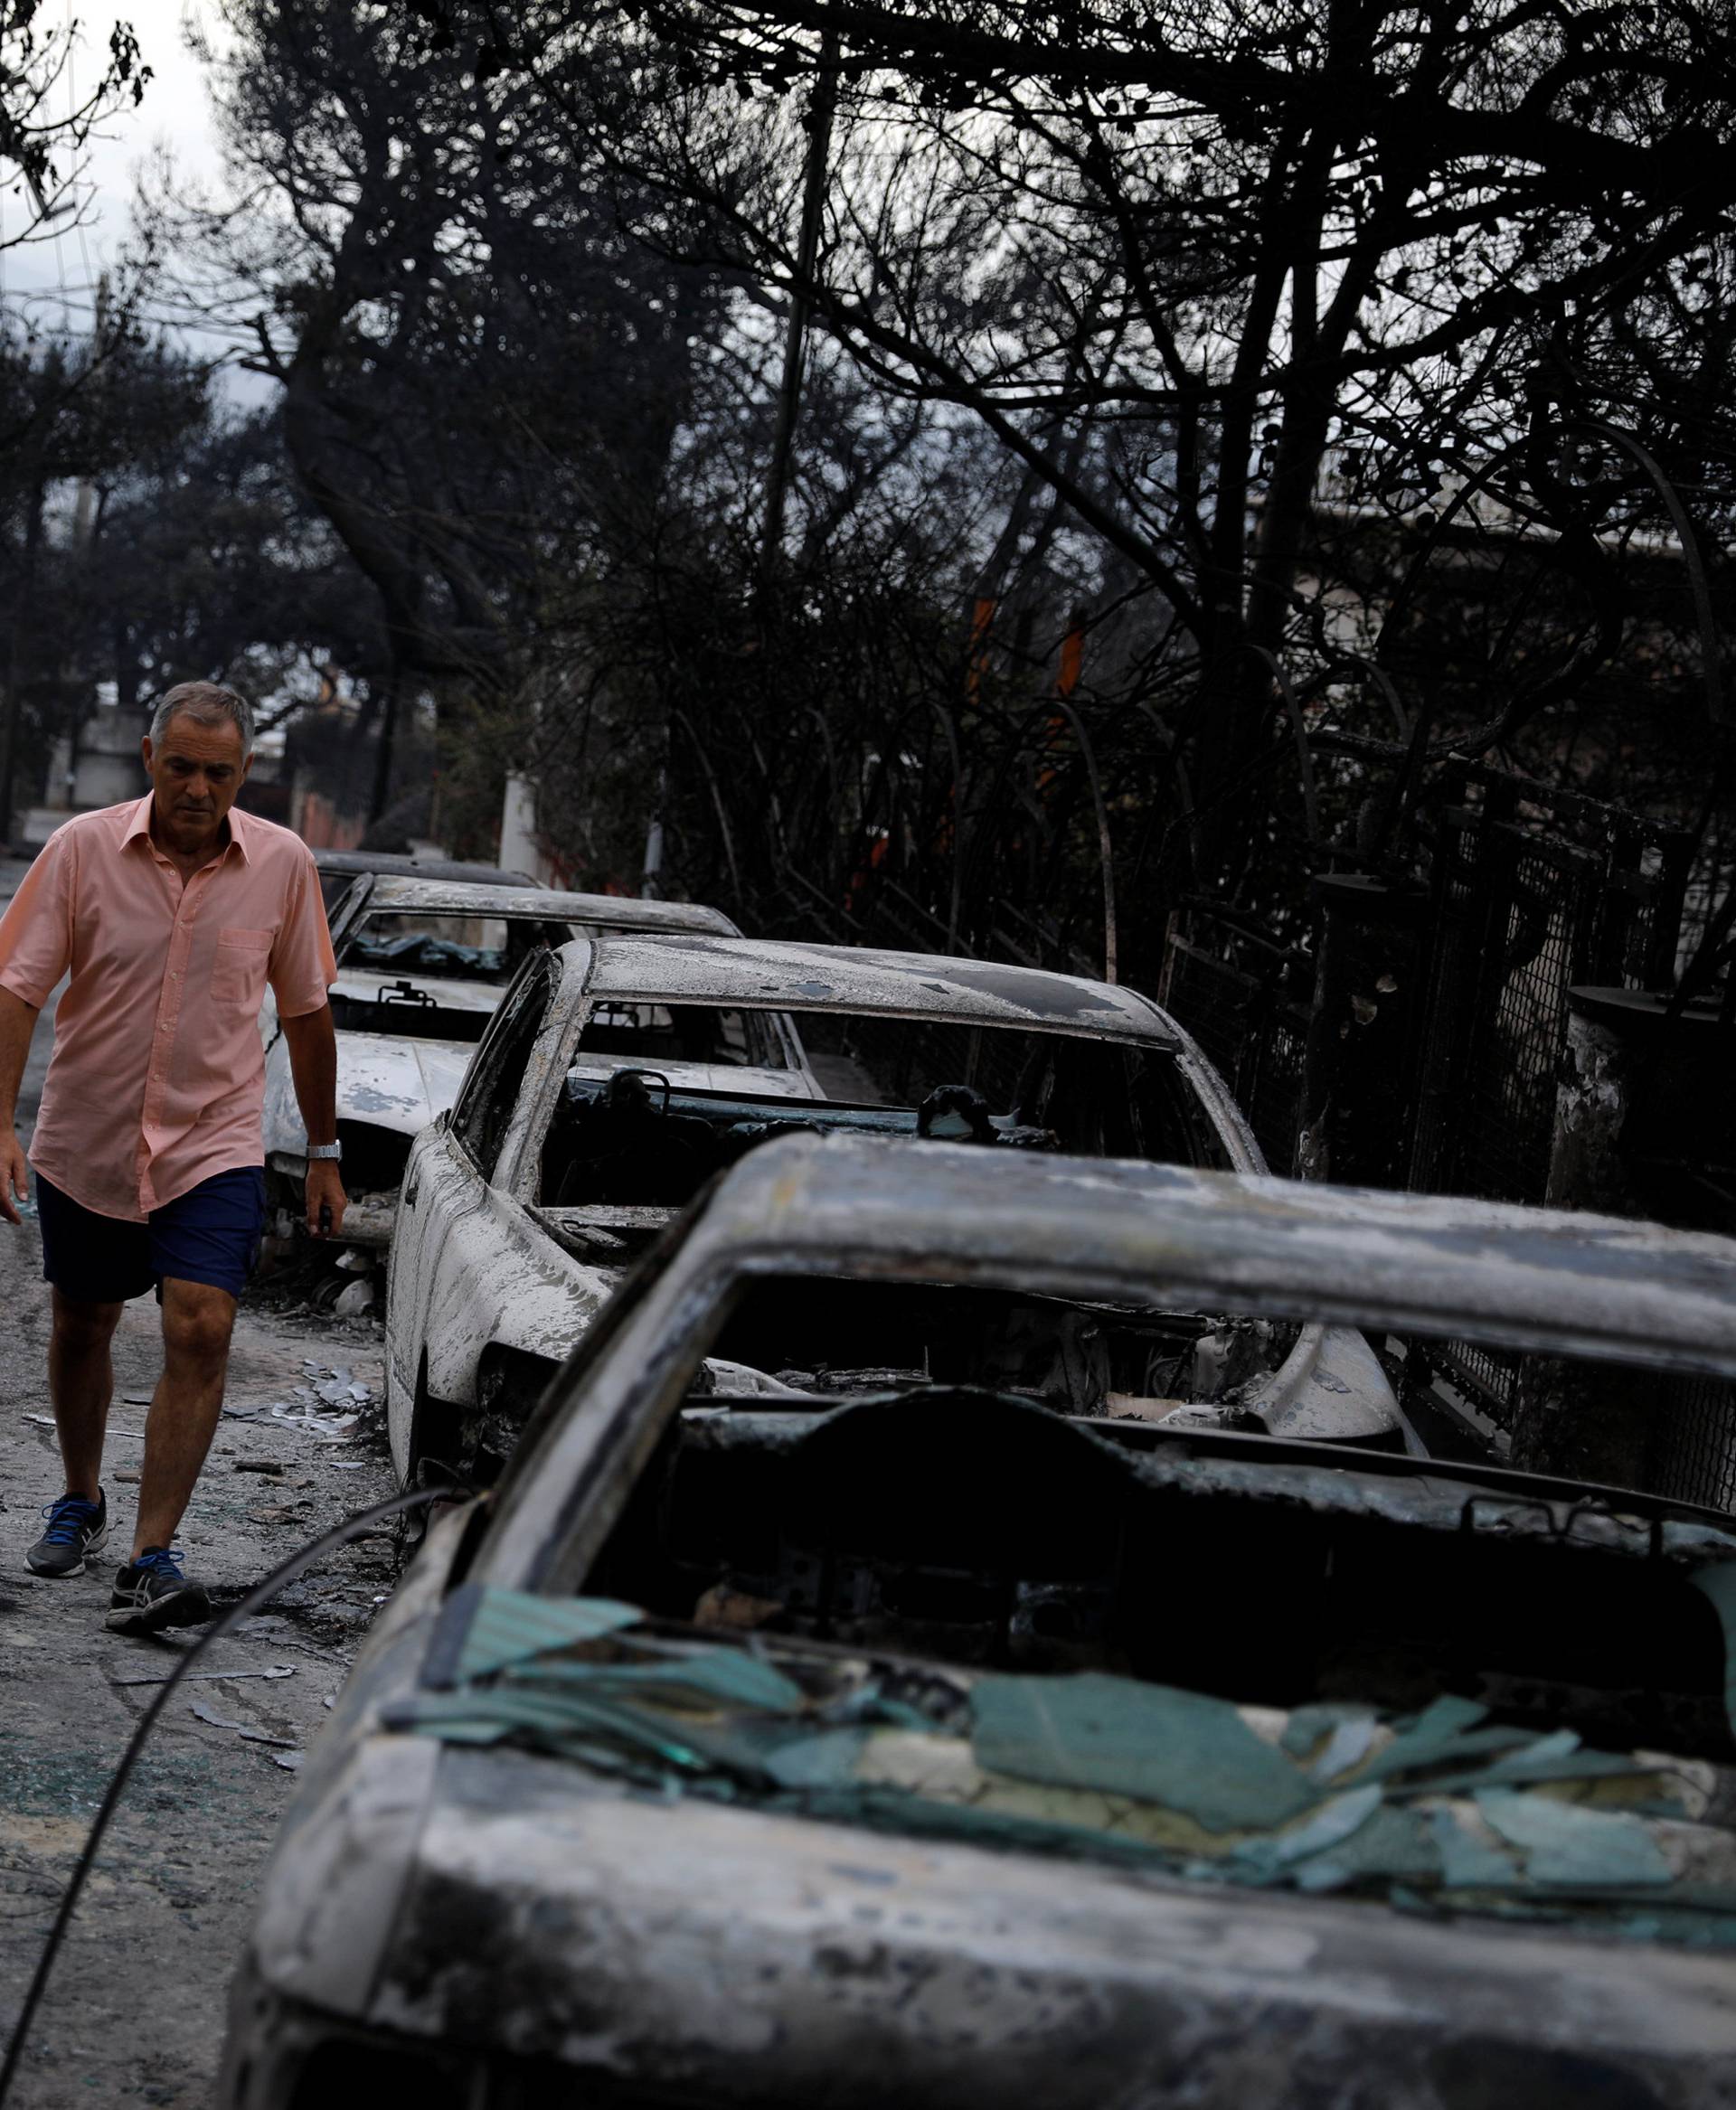 A man walks among burnt cars following a wildfire at the village of Mati